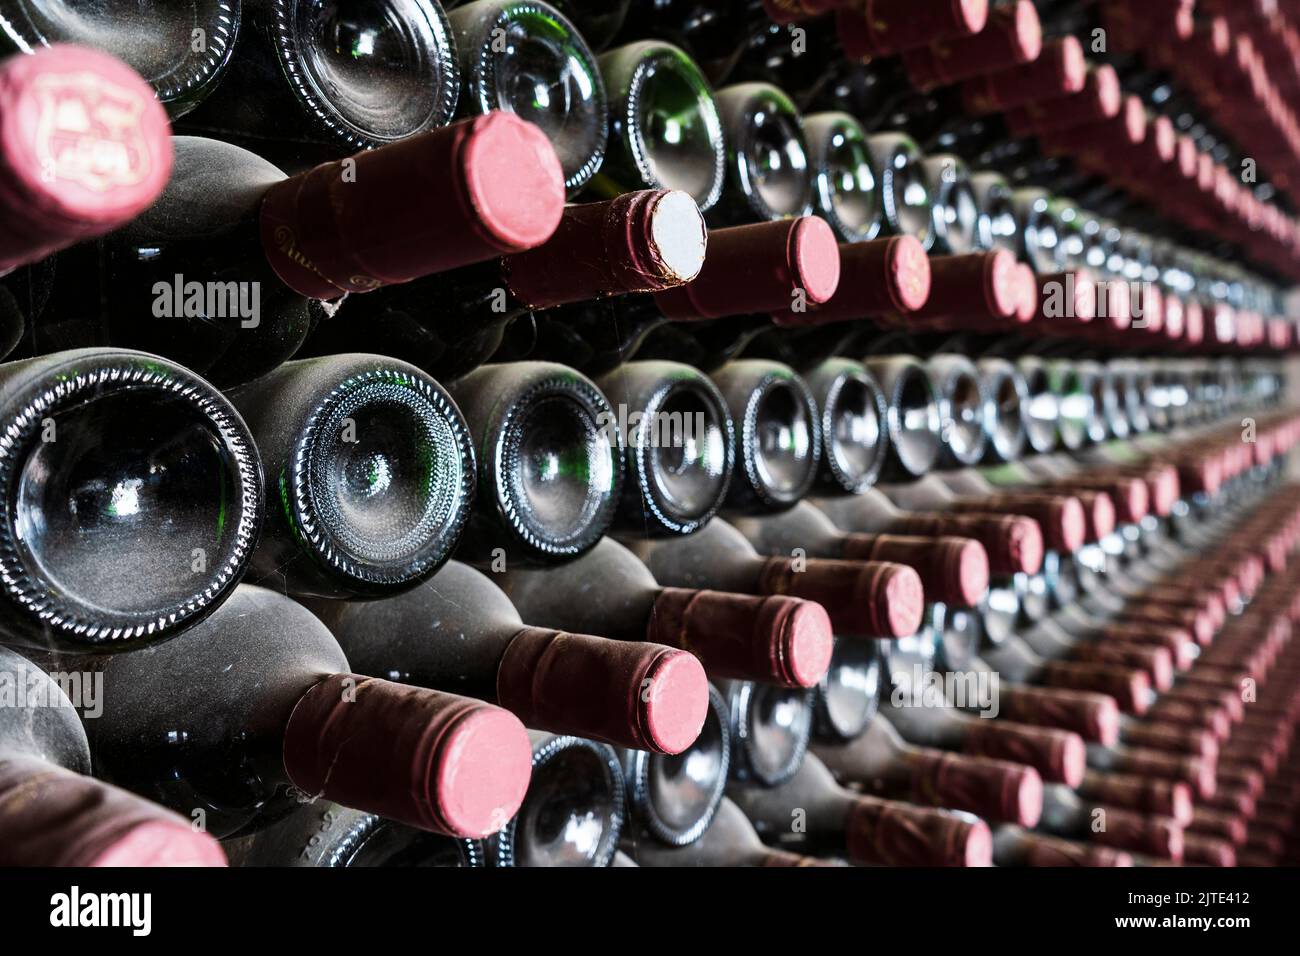 Many bottles in a row stacked on a winery shelf, Lanzarote, Spain Stock Photo